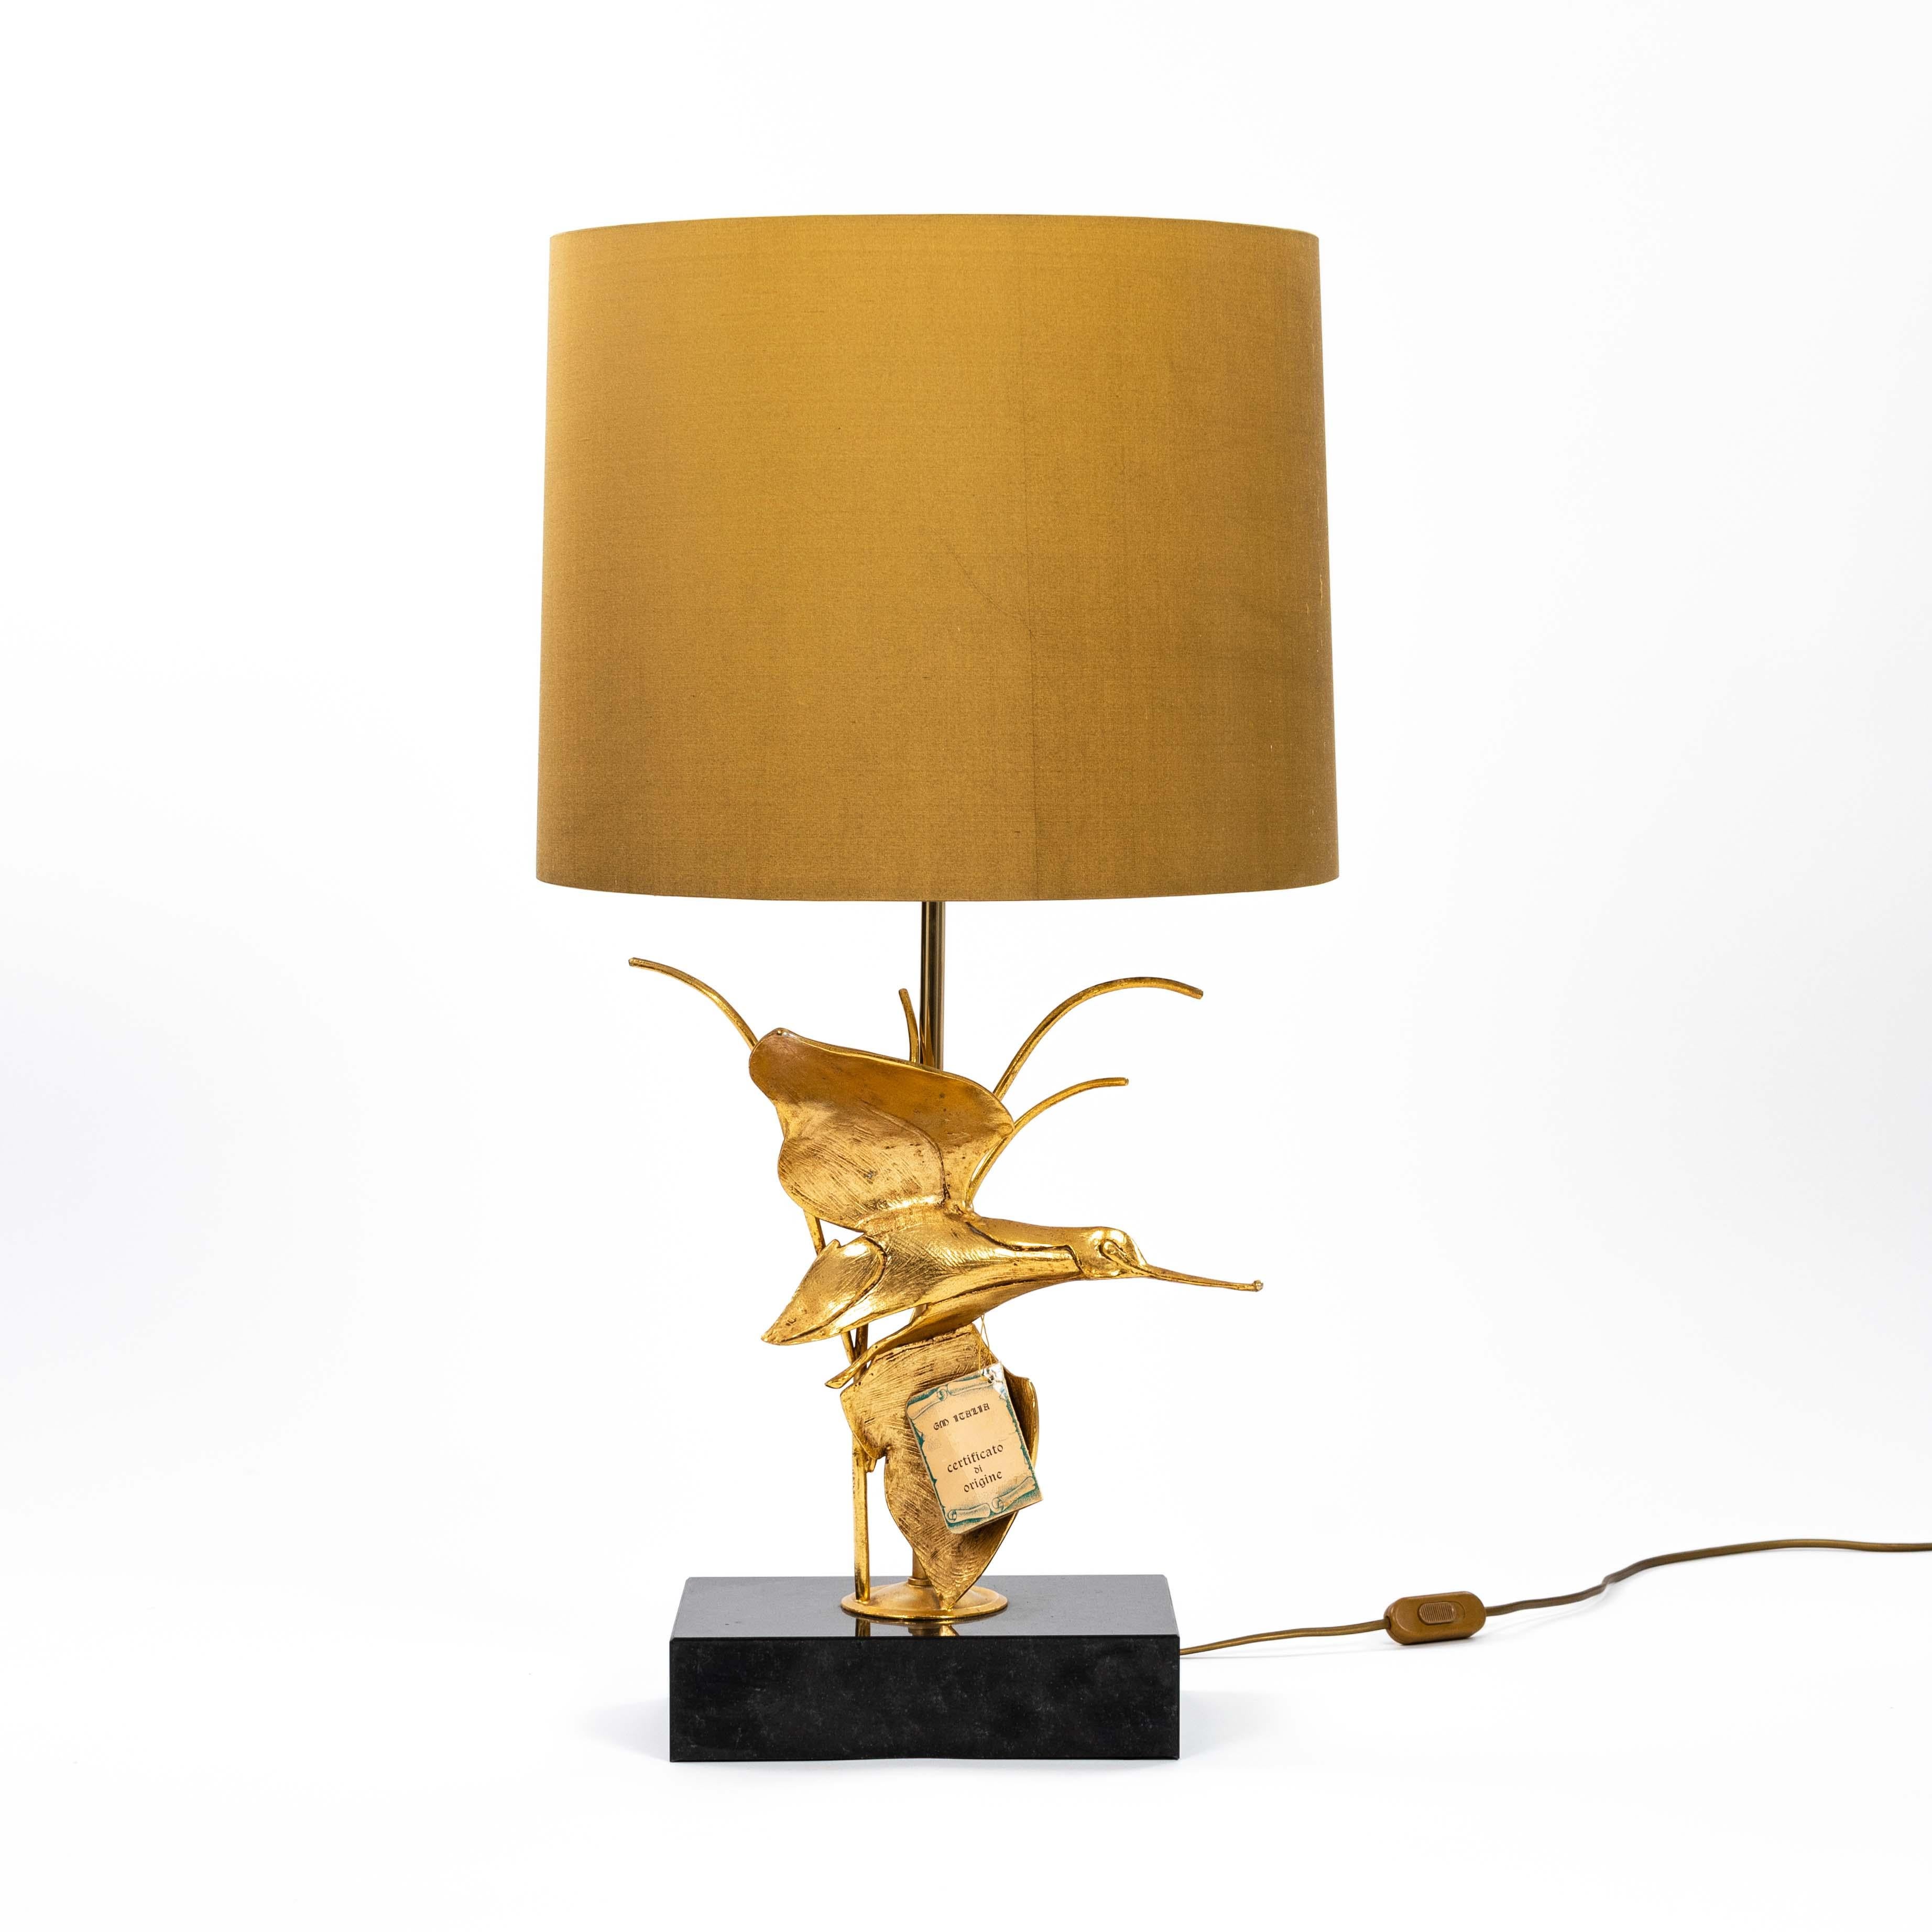 Mid-Century Italian brass sculptured and gilded - bird in flight - table lamp by GM ITALIA, Firenze 
marked with a separate label.
The brass object is fixed on a black colored marble base (width 23.5cm x depth 15.5cm x height 5.5cm).
A new round